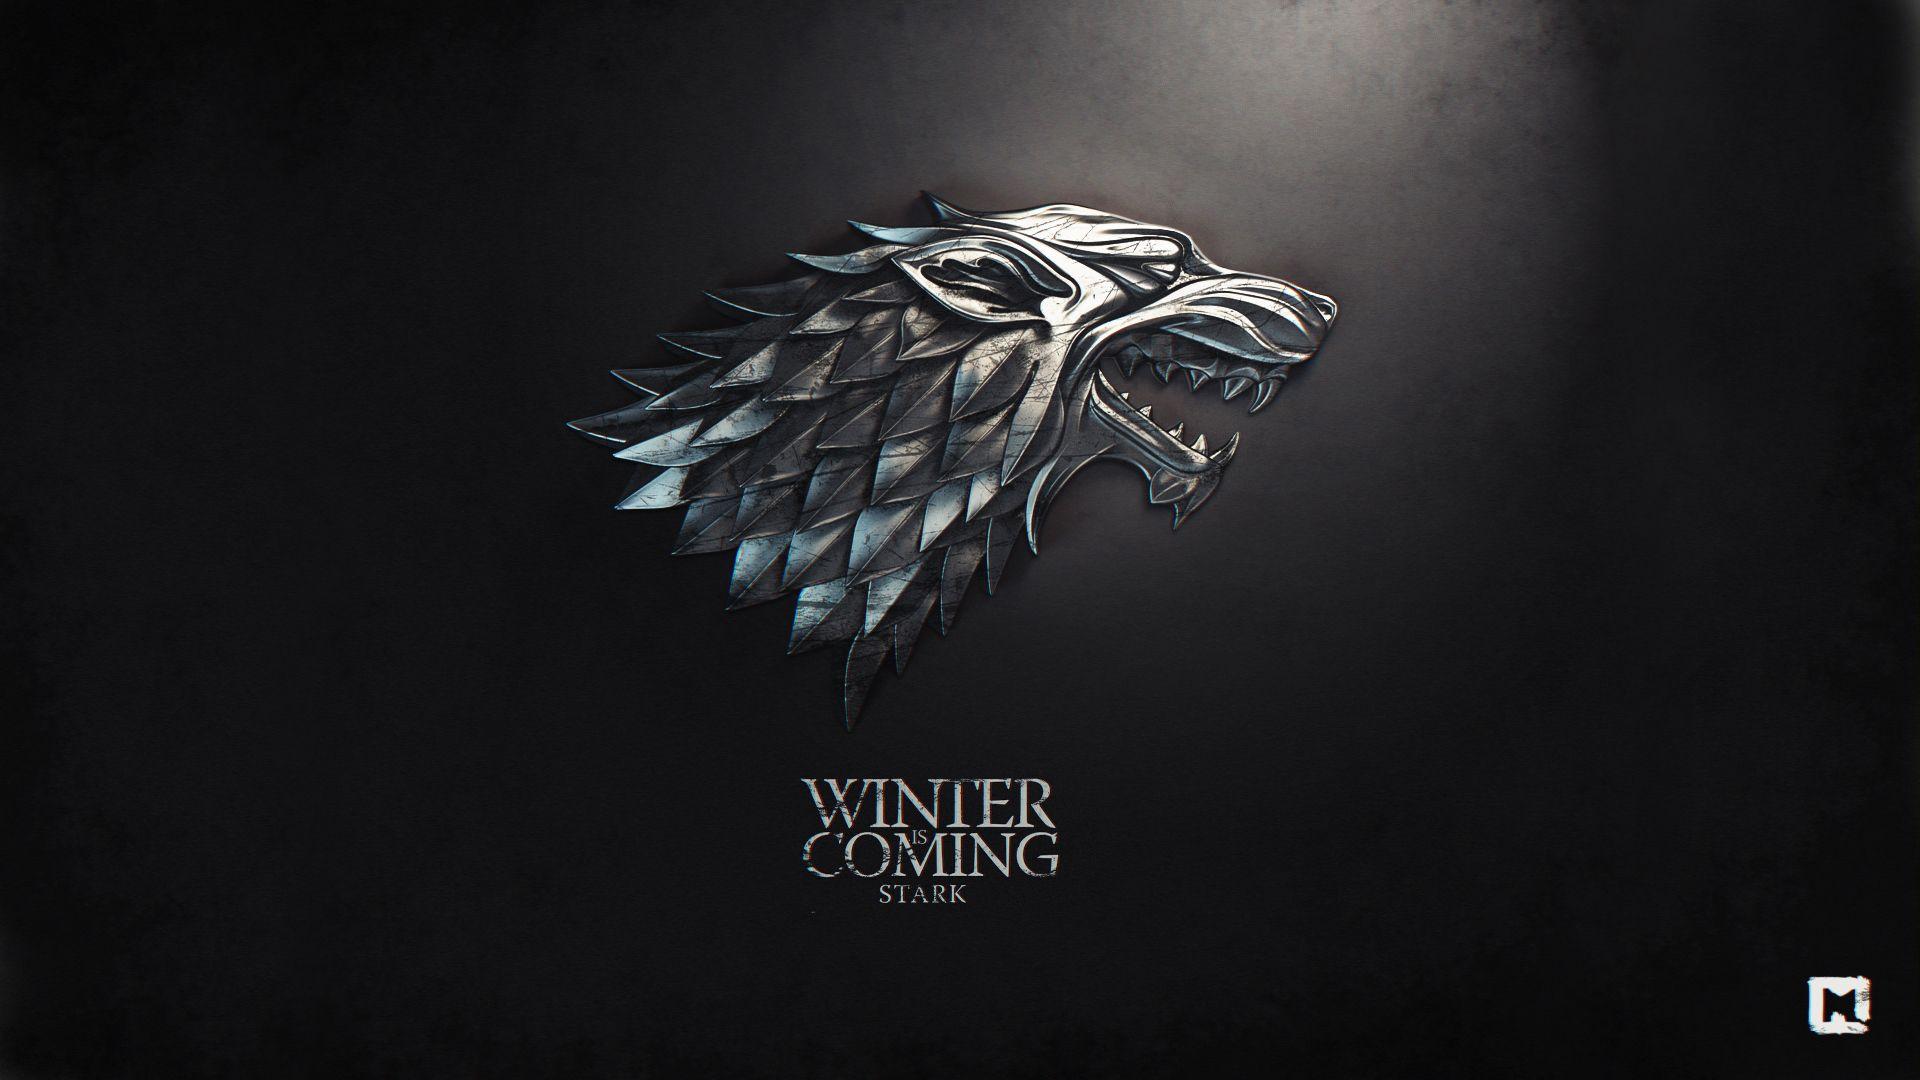 Games Of Thrones (1920x1080). Game of thrones houses, Winter is coming wallpaper, Game of thrones tv